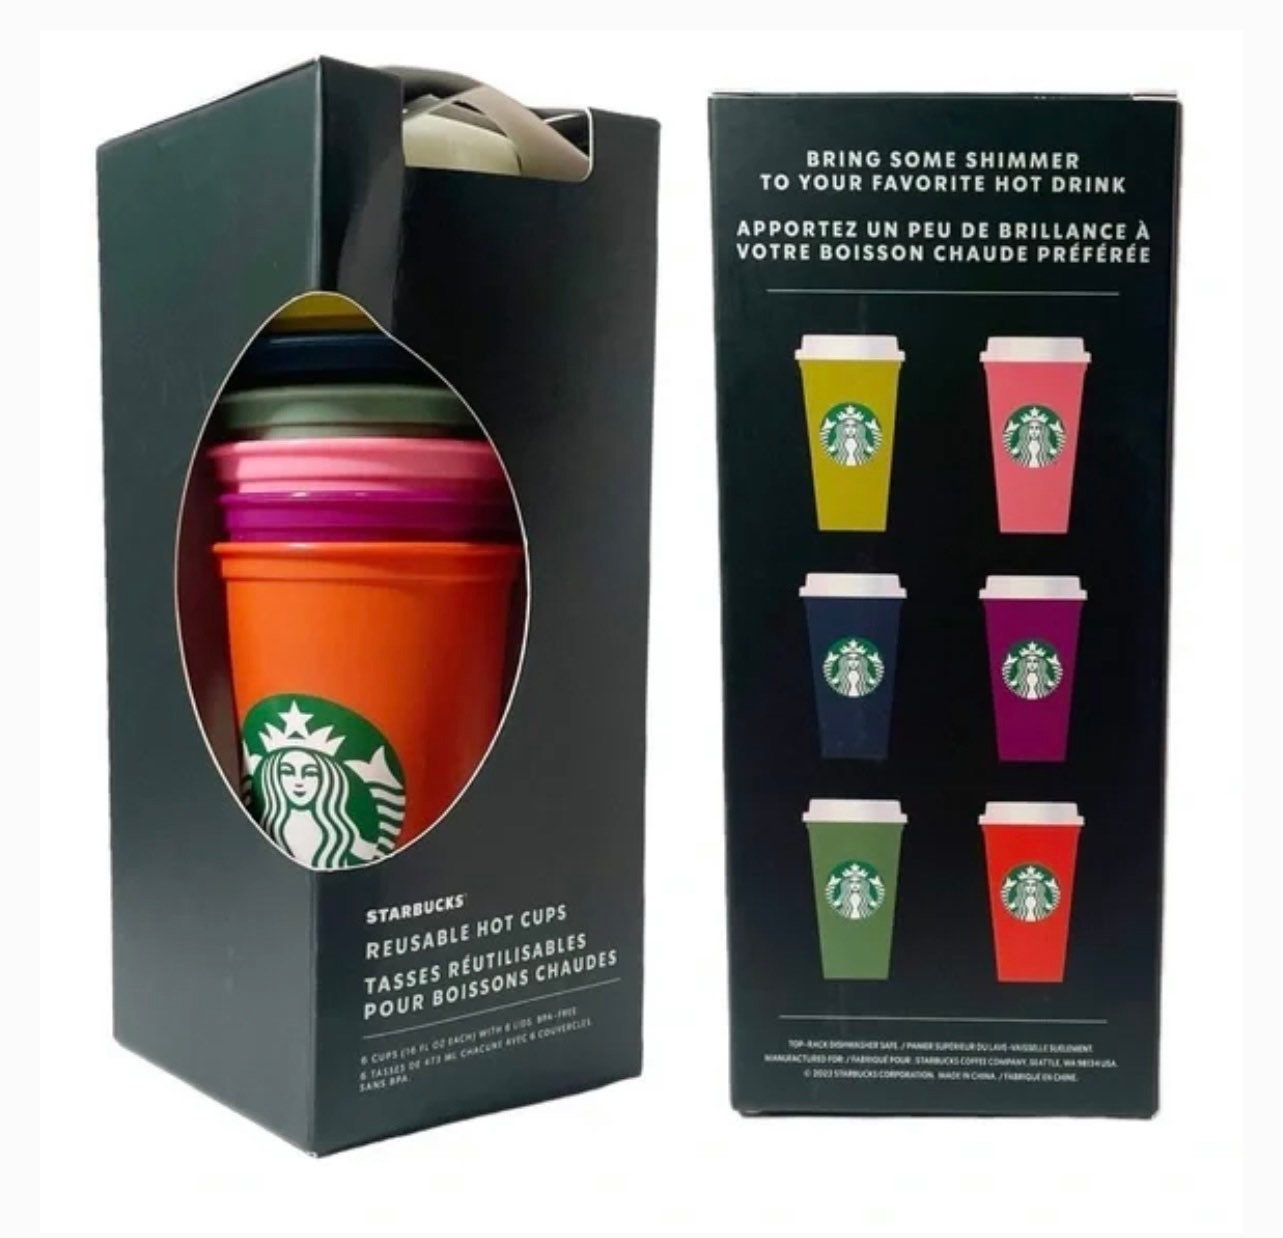 Starbucks Reusable Travel Cup To Go Coffee Cup (Grande 16 Oz) 5 Pack 